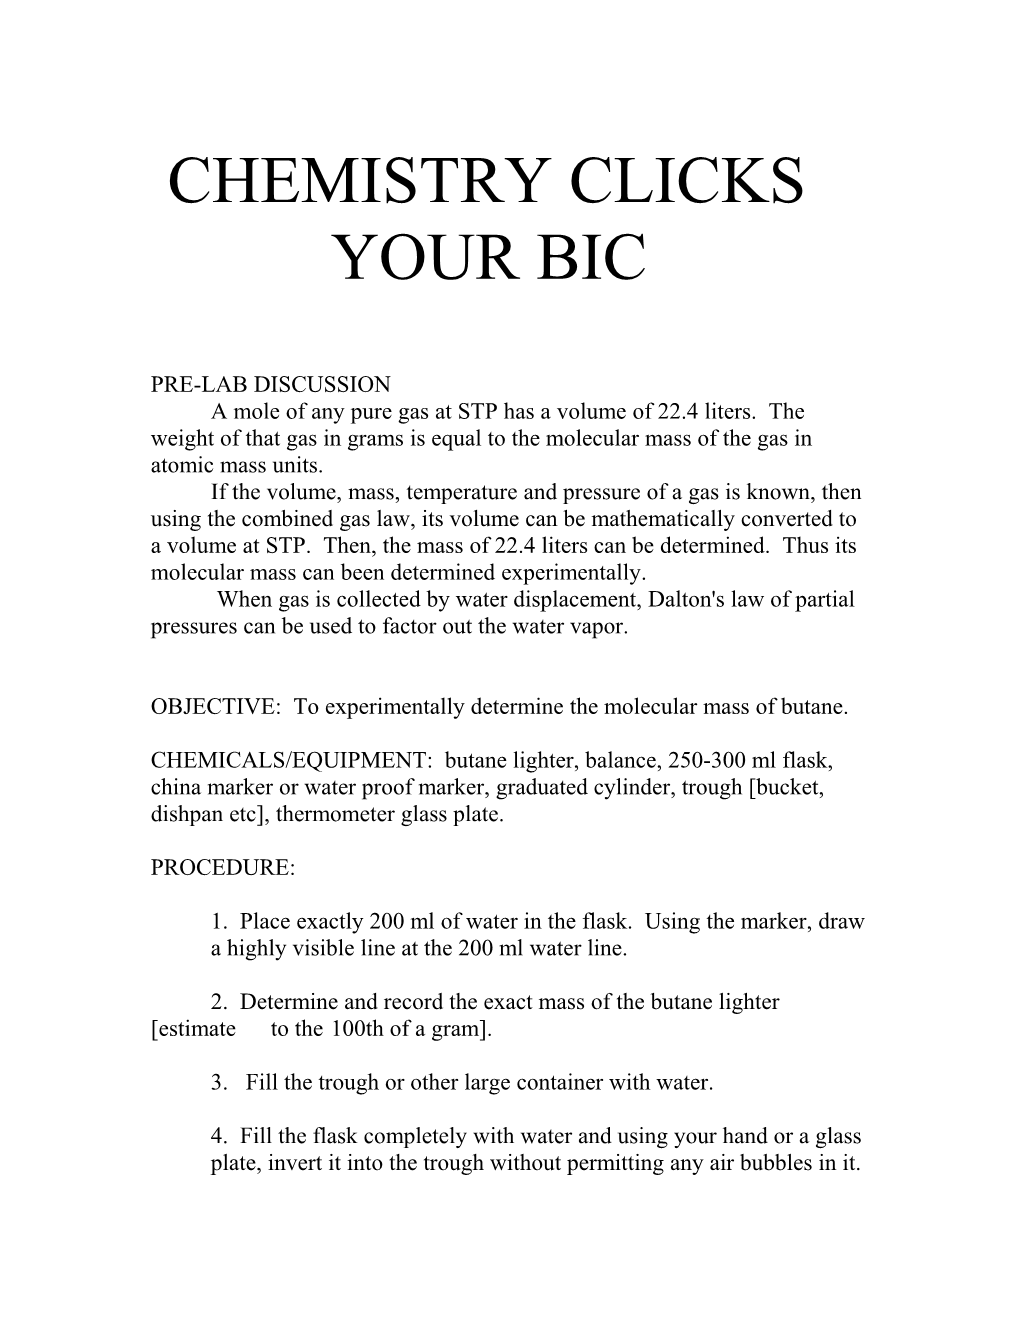 Chemistry Clicks Your Bic